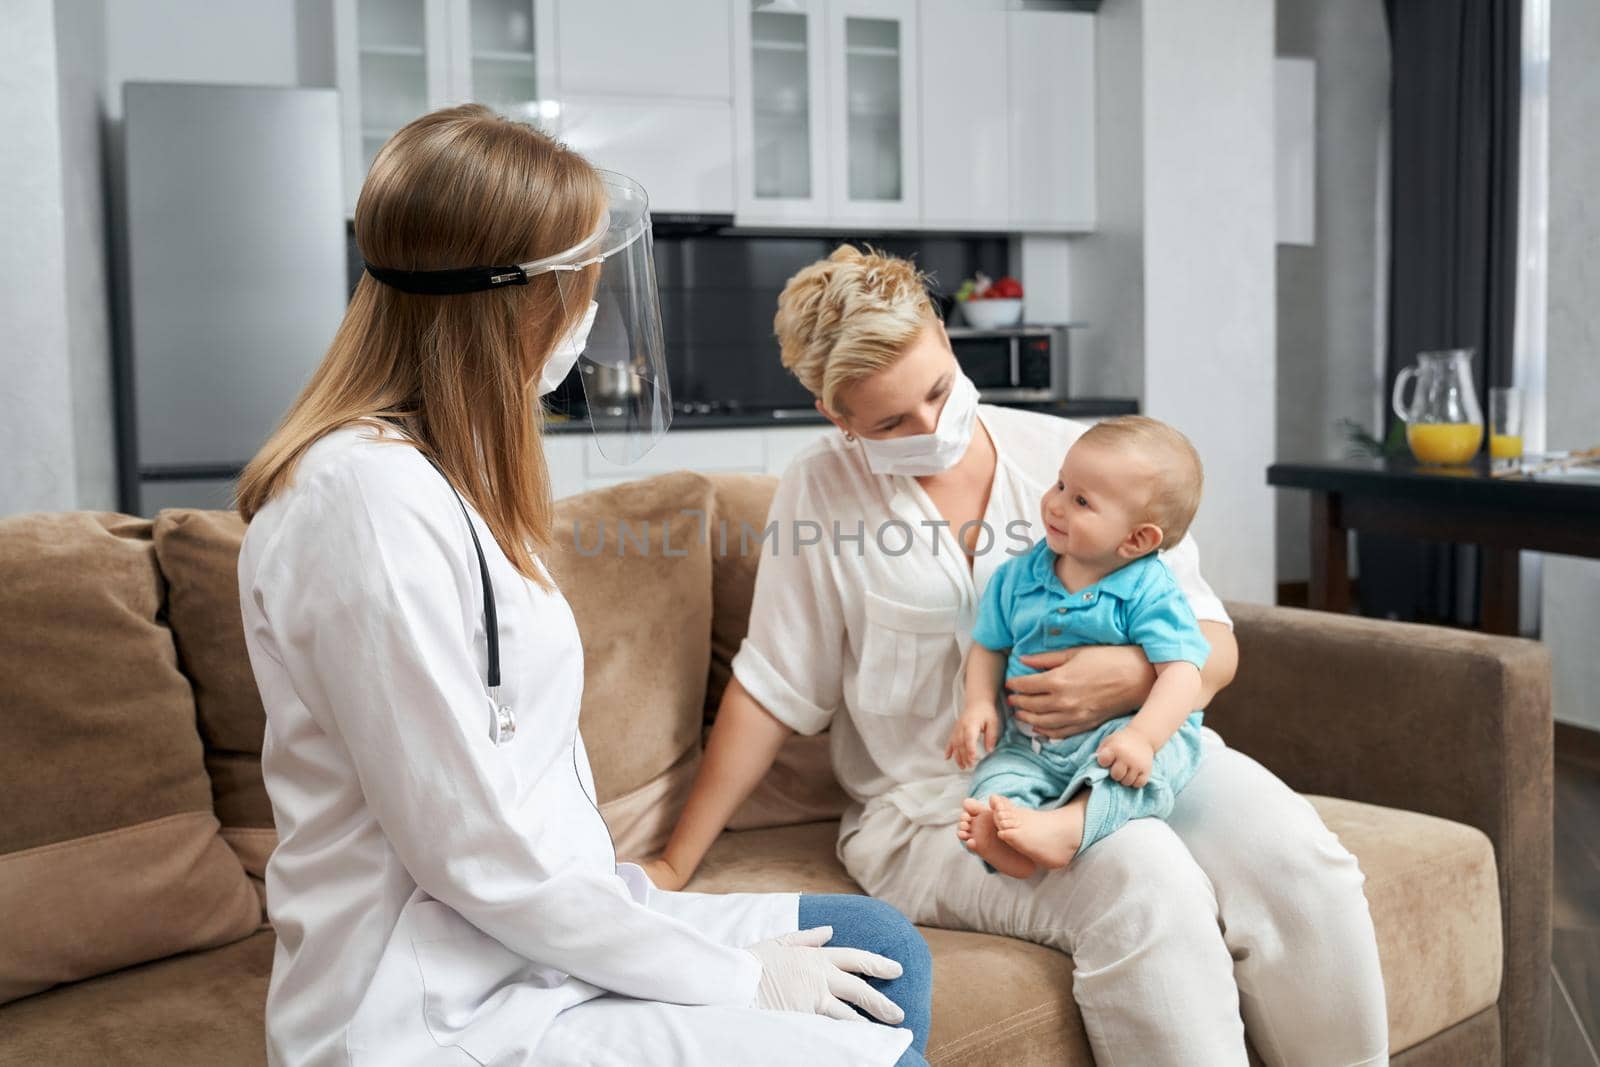 Female pediatrician in medical coat, mask and gloves visiting little baby at home. Young mother in face mask sitting on couch with her son during health checkup.